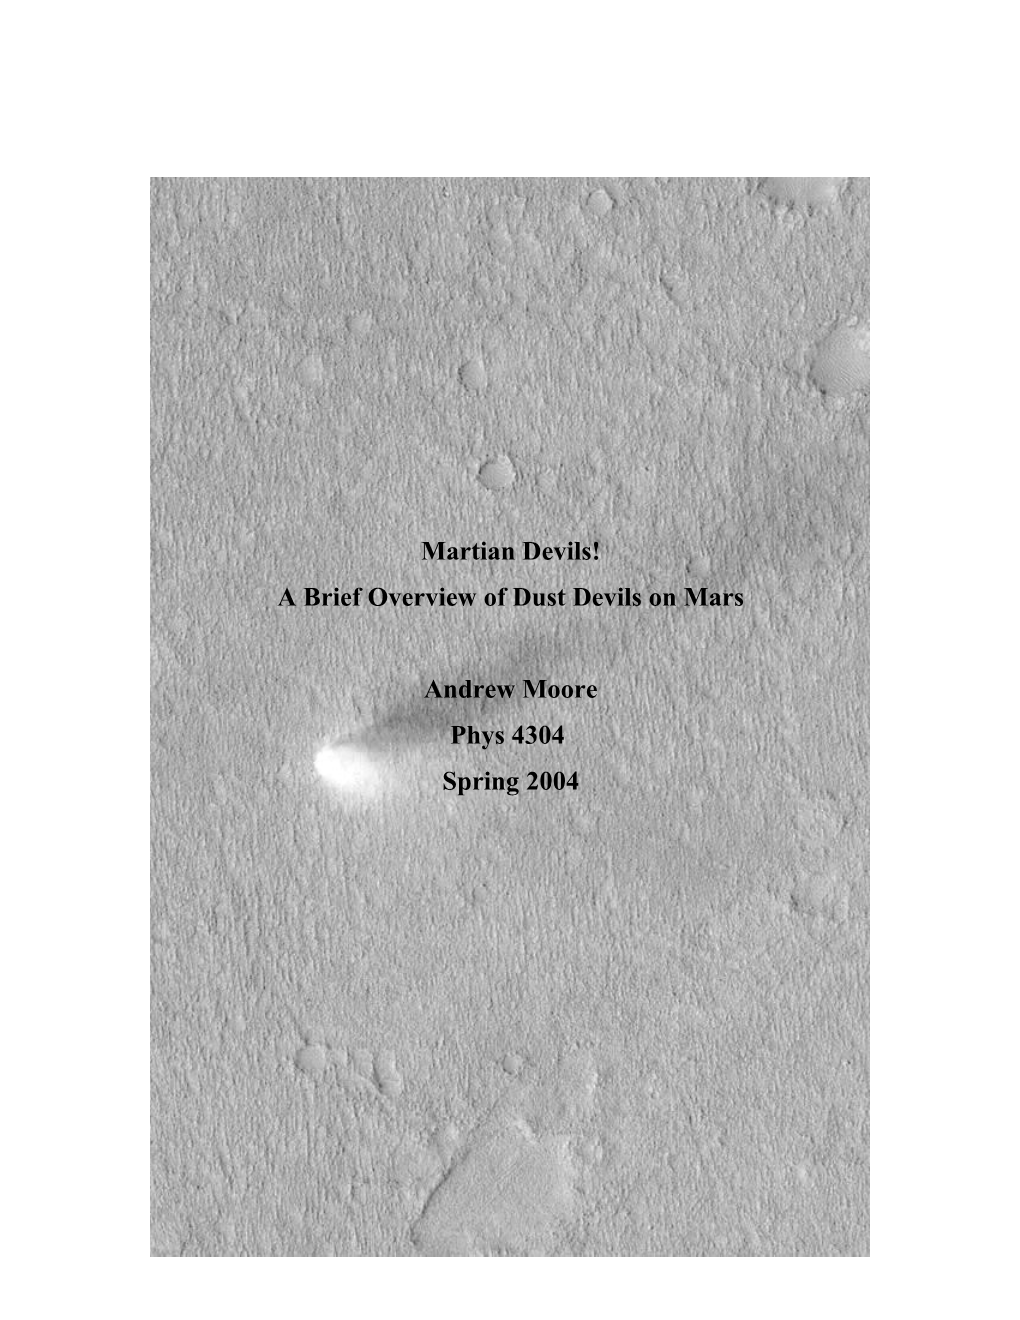 A Survey of Recent Research on Understanding and Modeling Dust Devils on Mars